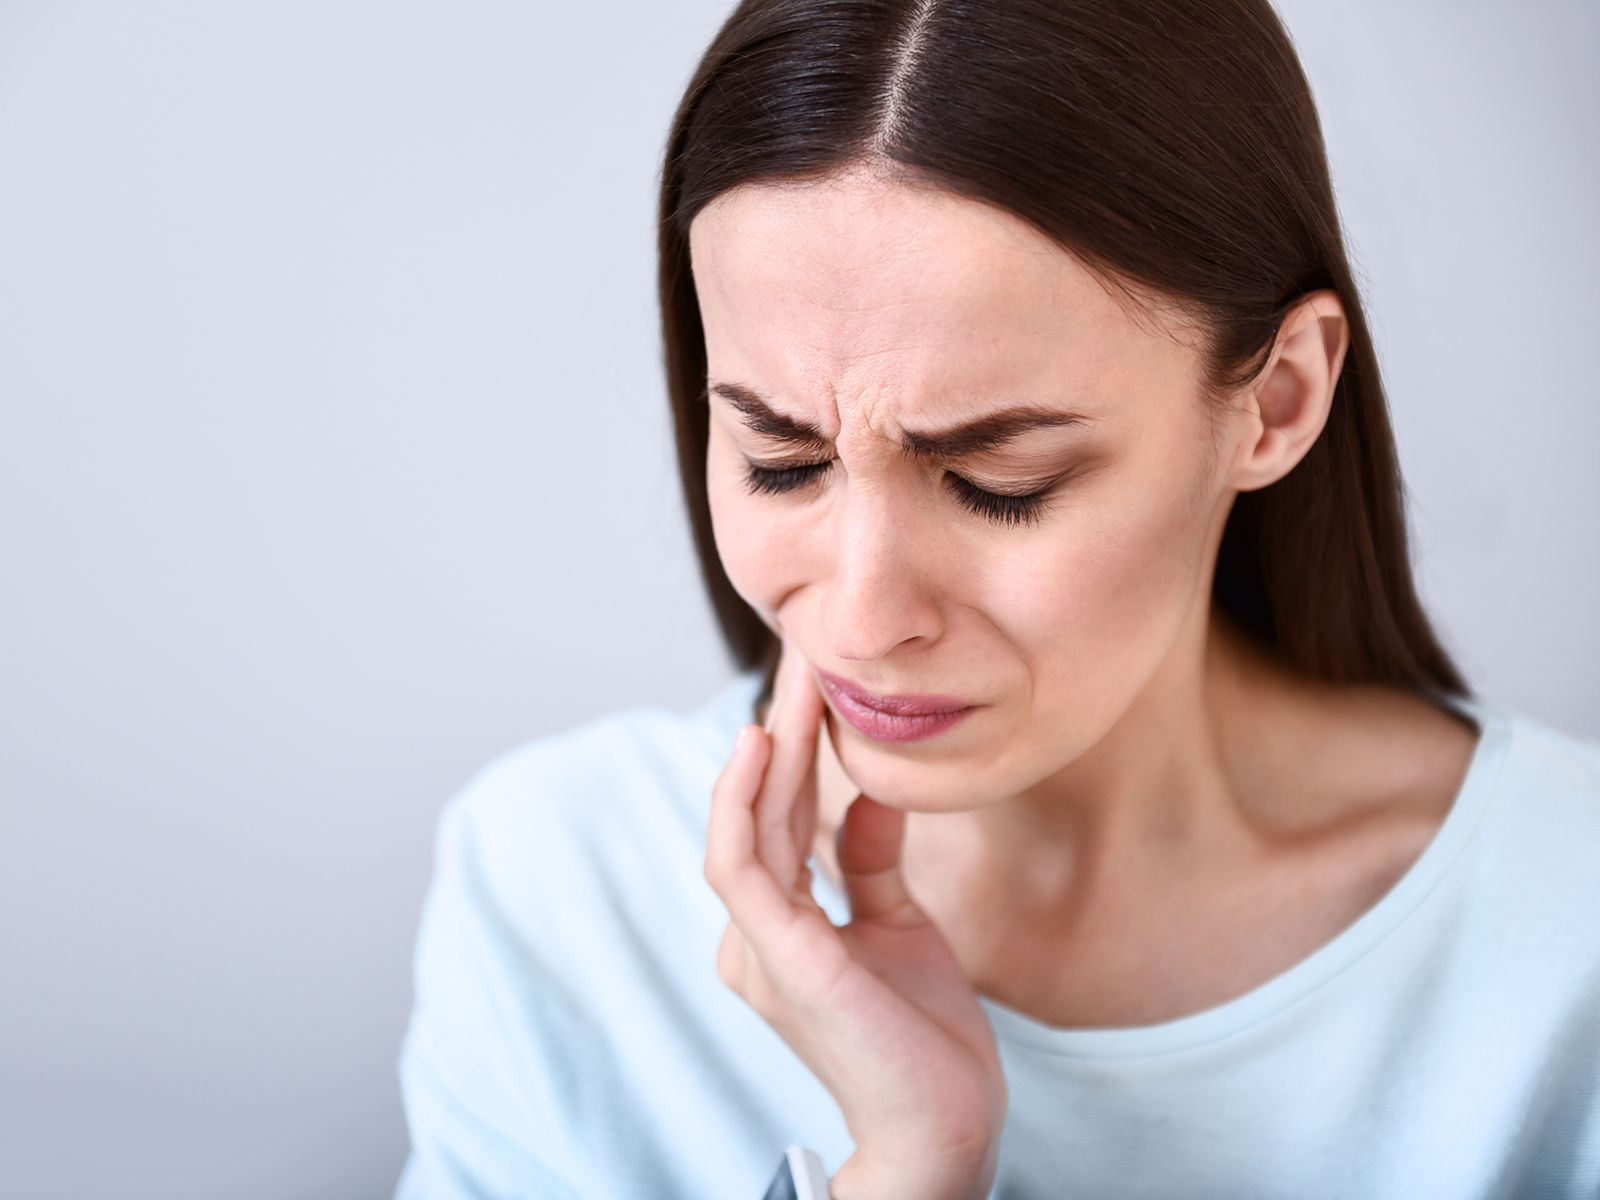 Is Your Dental Implant Pain Normal?